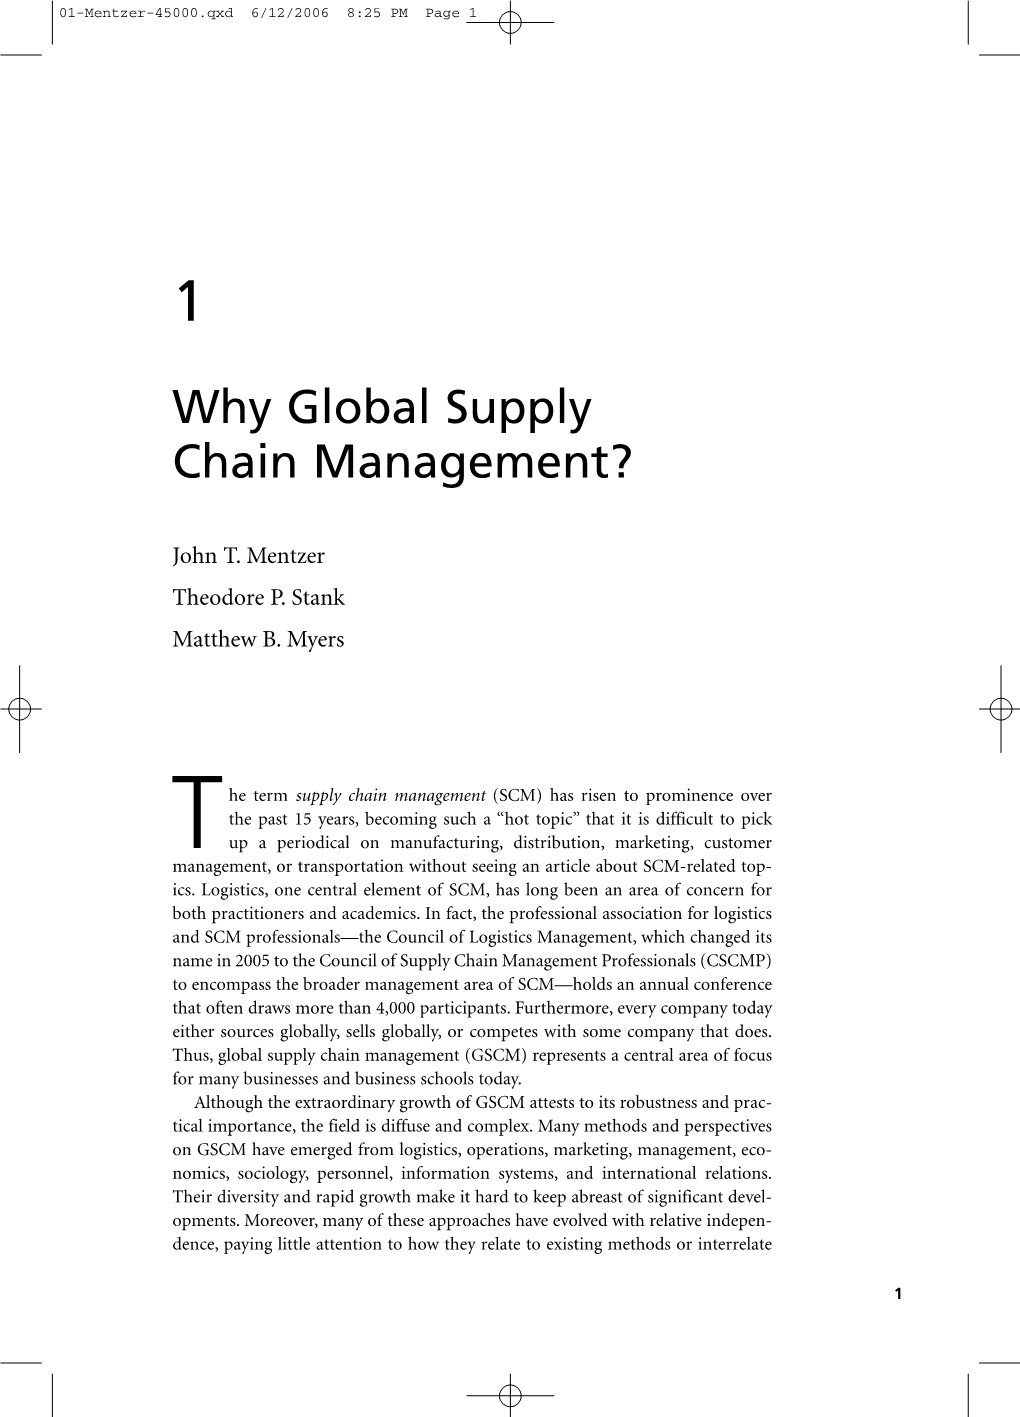 Why Global Supply Chain Management?